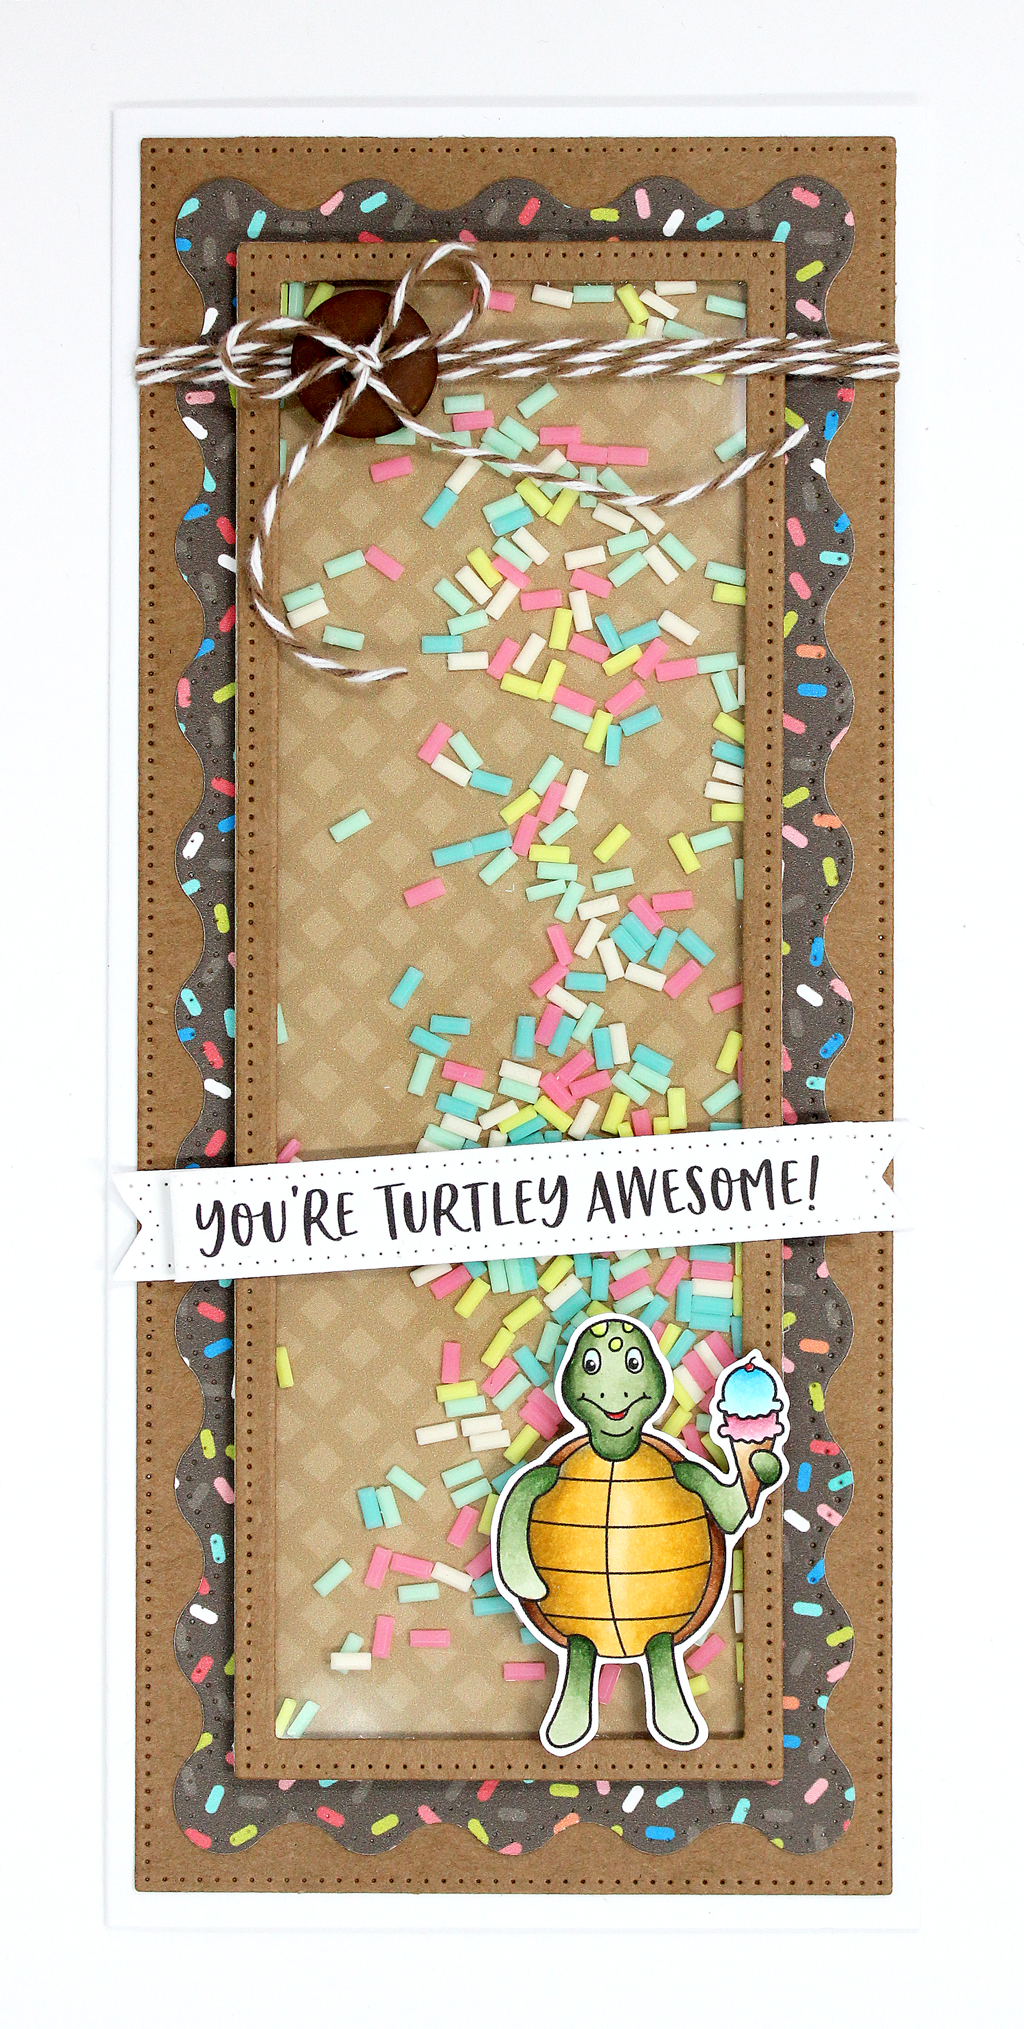 Homemade card using the stamp set and die, "Turtley Awesome" from Dare 2B Artzy. Image of a turtle holding an ice cream cone and the sentiment, "You're Turtley Awesome".